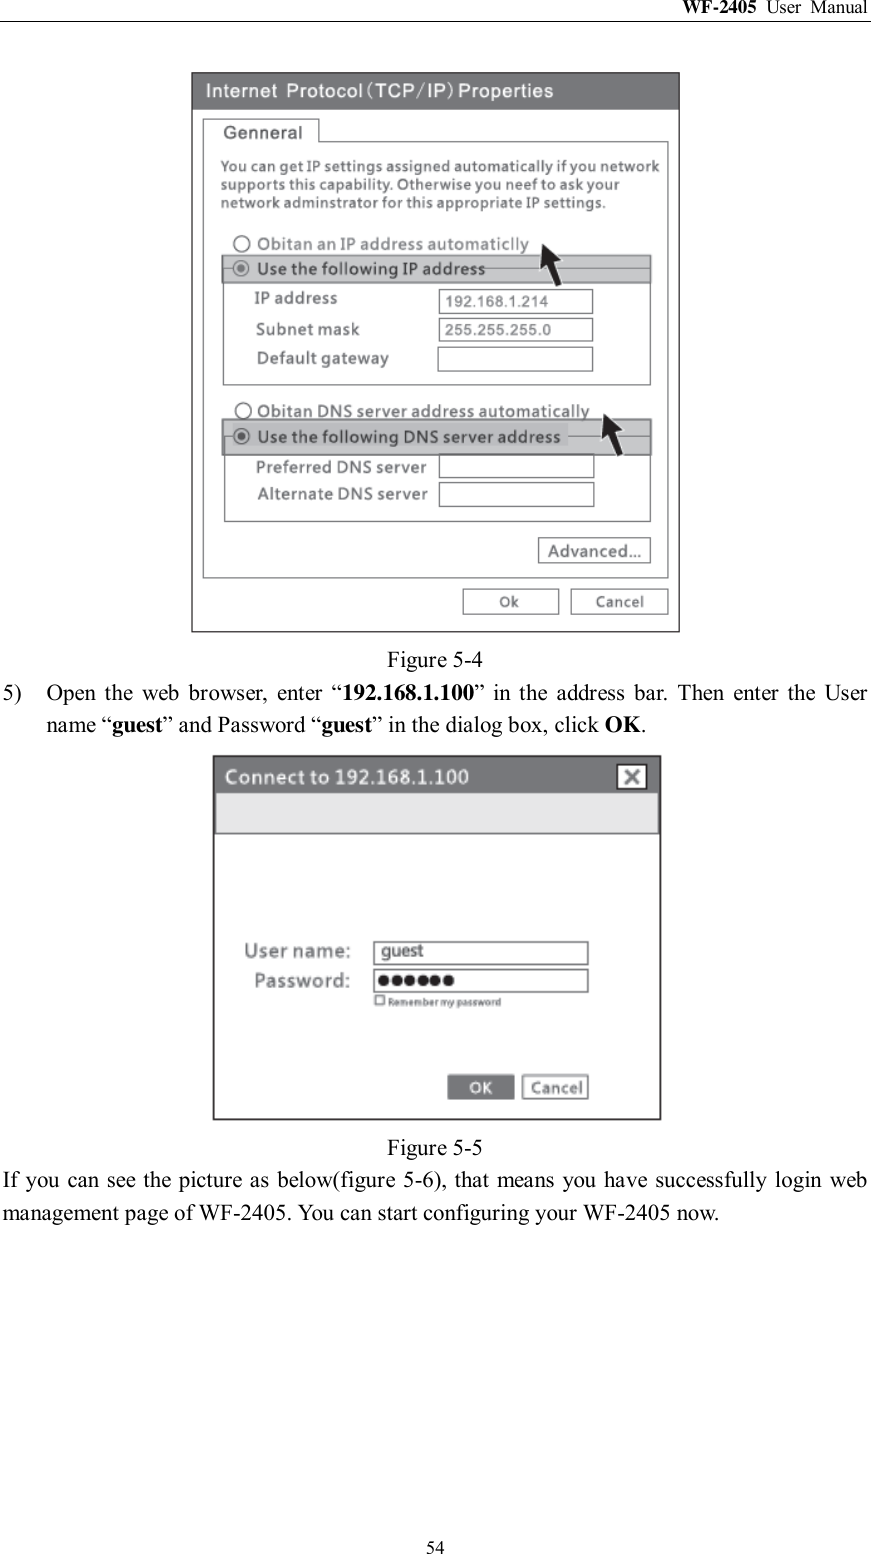 WF-2405  User  Manual  54  Figure 5-4 5) Open  the  web  browser,  enter  “192.168.1.100”  in  the  address  bar.  Then  enter  the  User name “guest” and Password “guest” in the dialog box, click OK.  Figure 5-5 If you can see  the picture as below(figure 5-6), that means you have successfully login web management page of WF-2405. You can start configuring your WF-2405 now. 